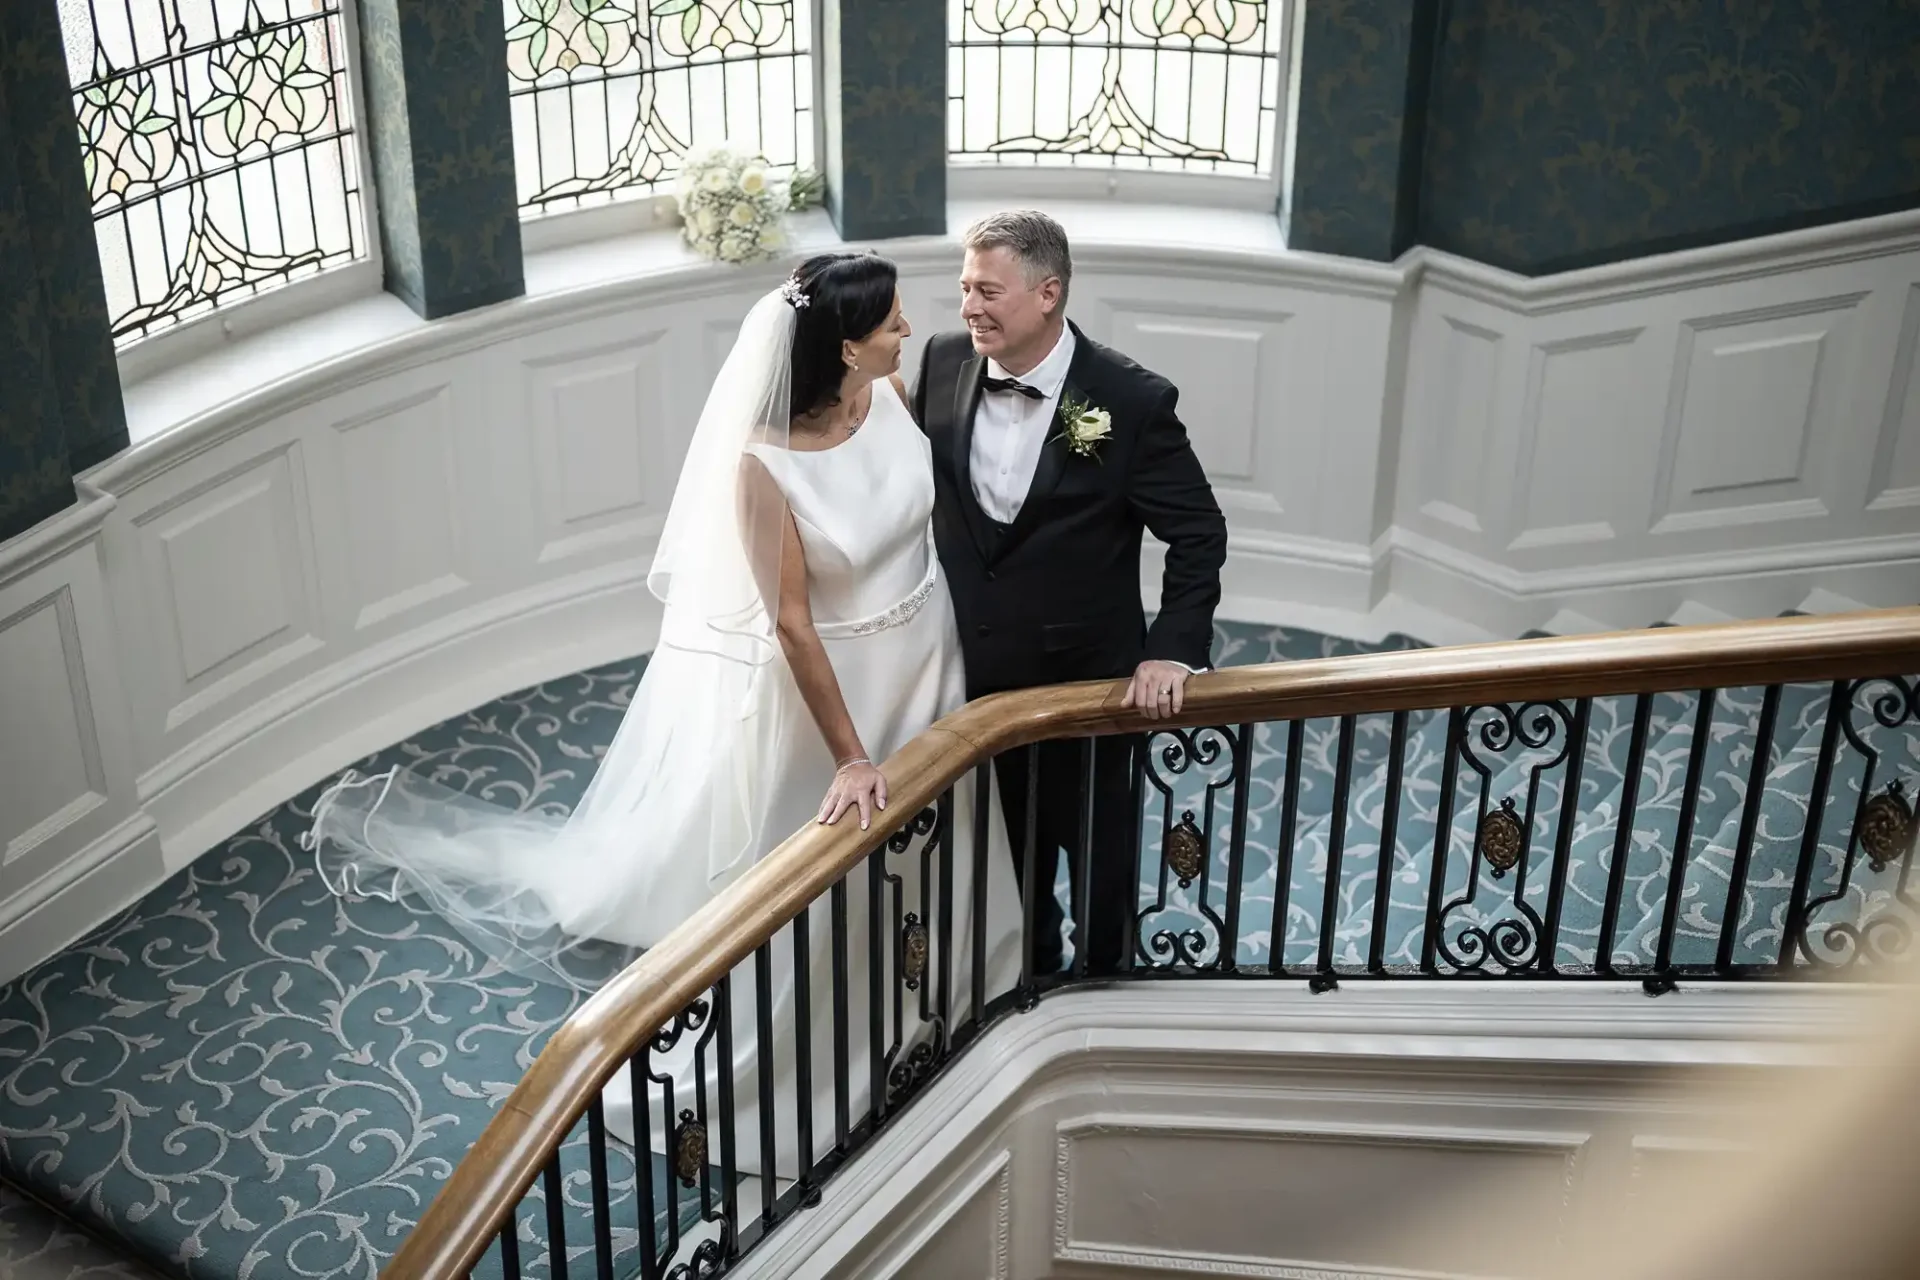 A bride and groom stand on an ornate staircase with stained glass windows, looking at each other affectionately.